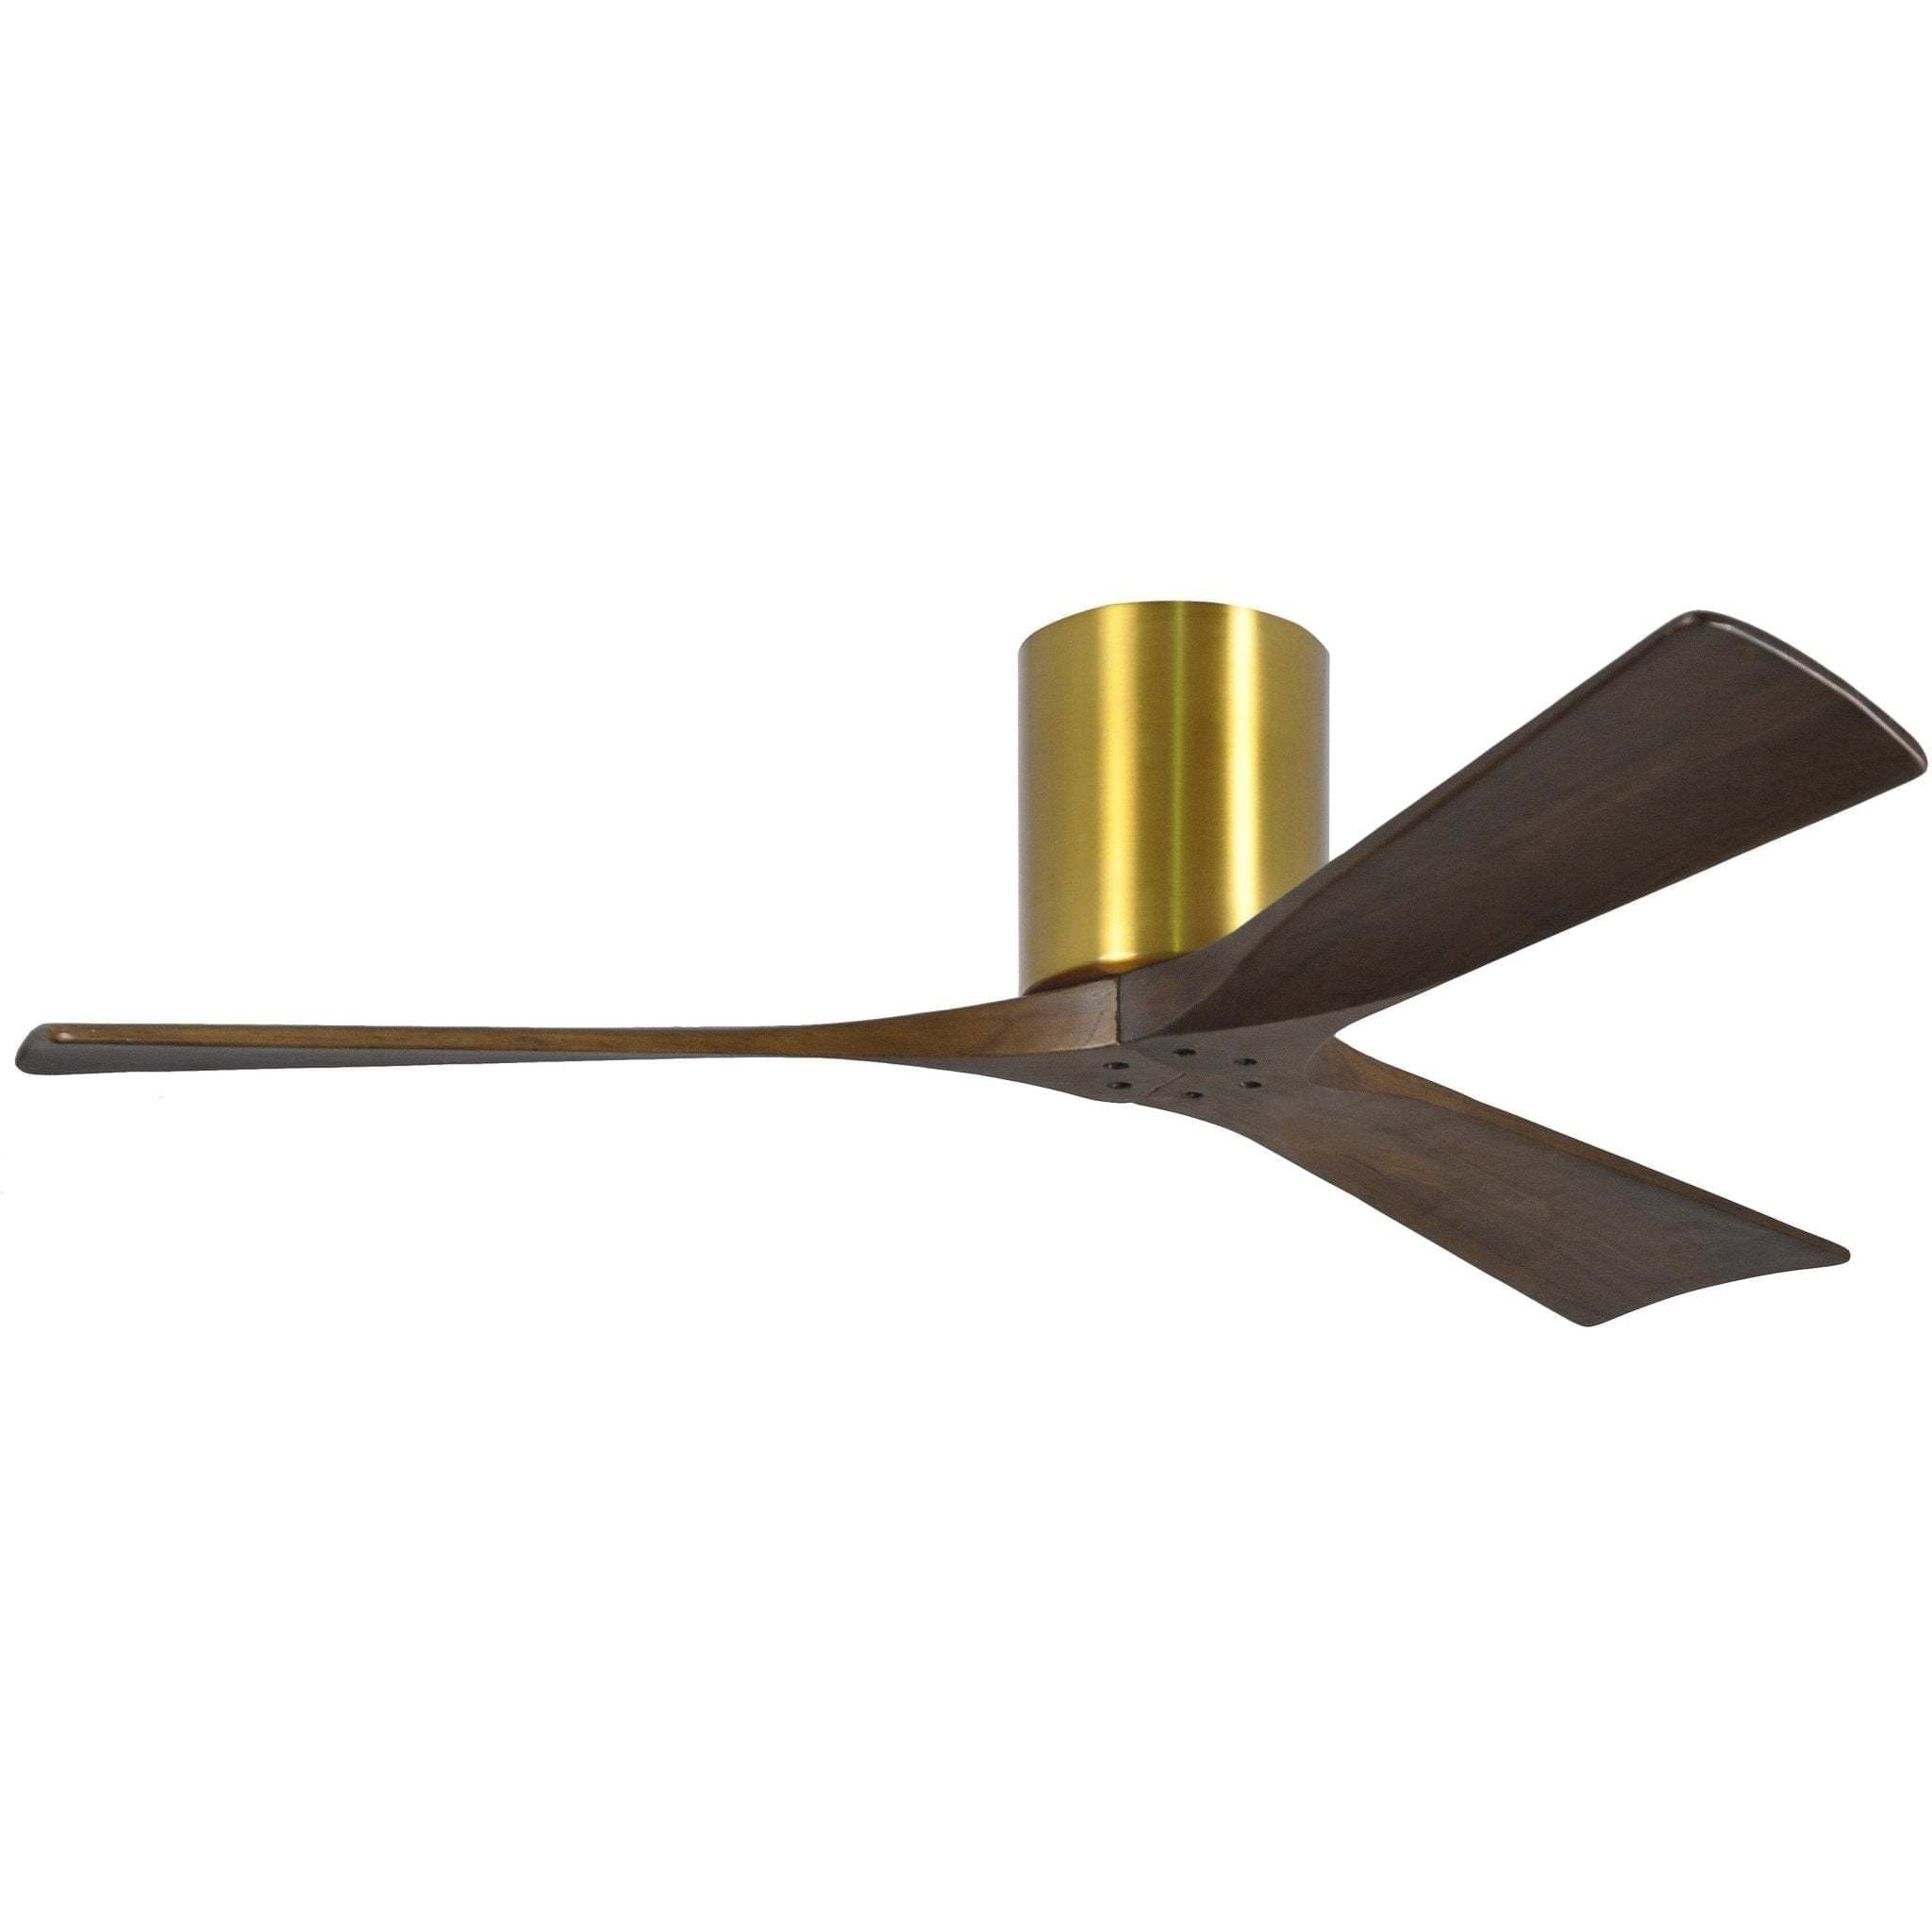 Shown in Brushed Brass with Walnut Tone Blades